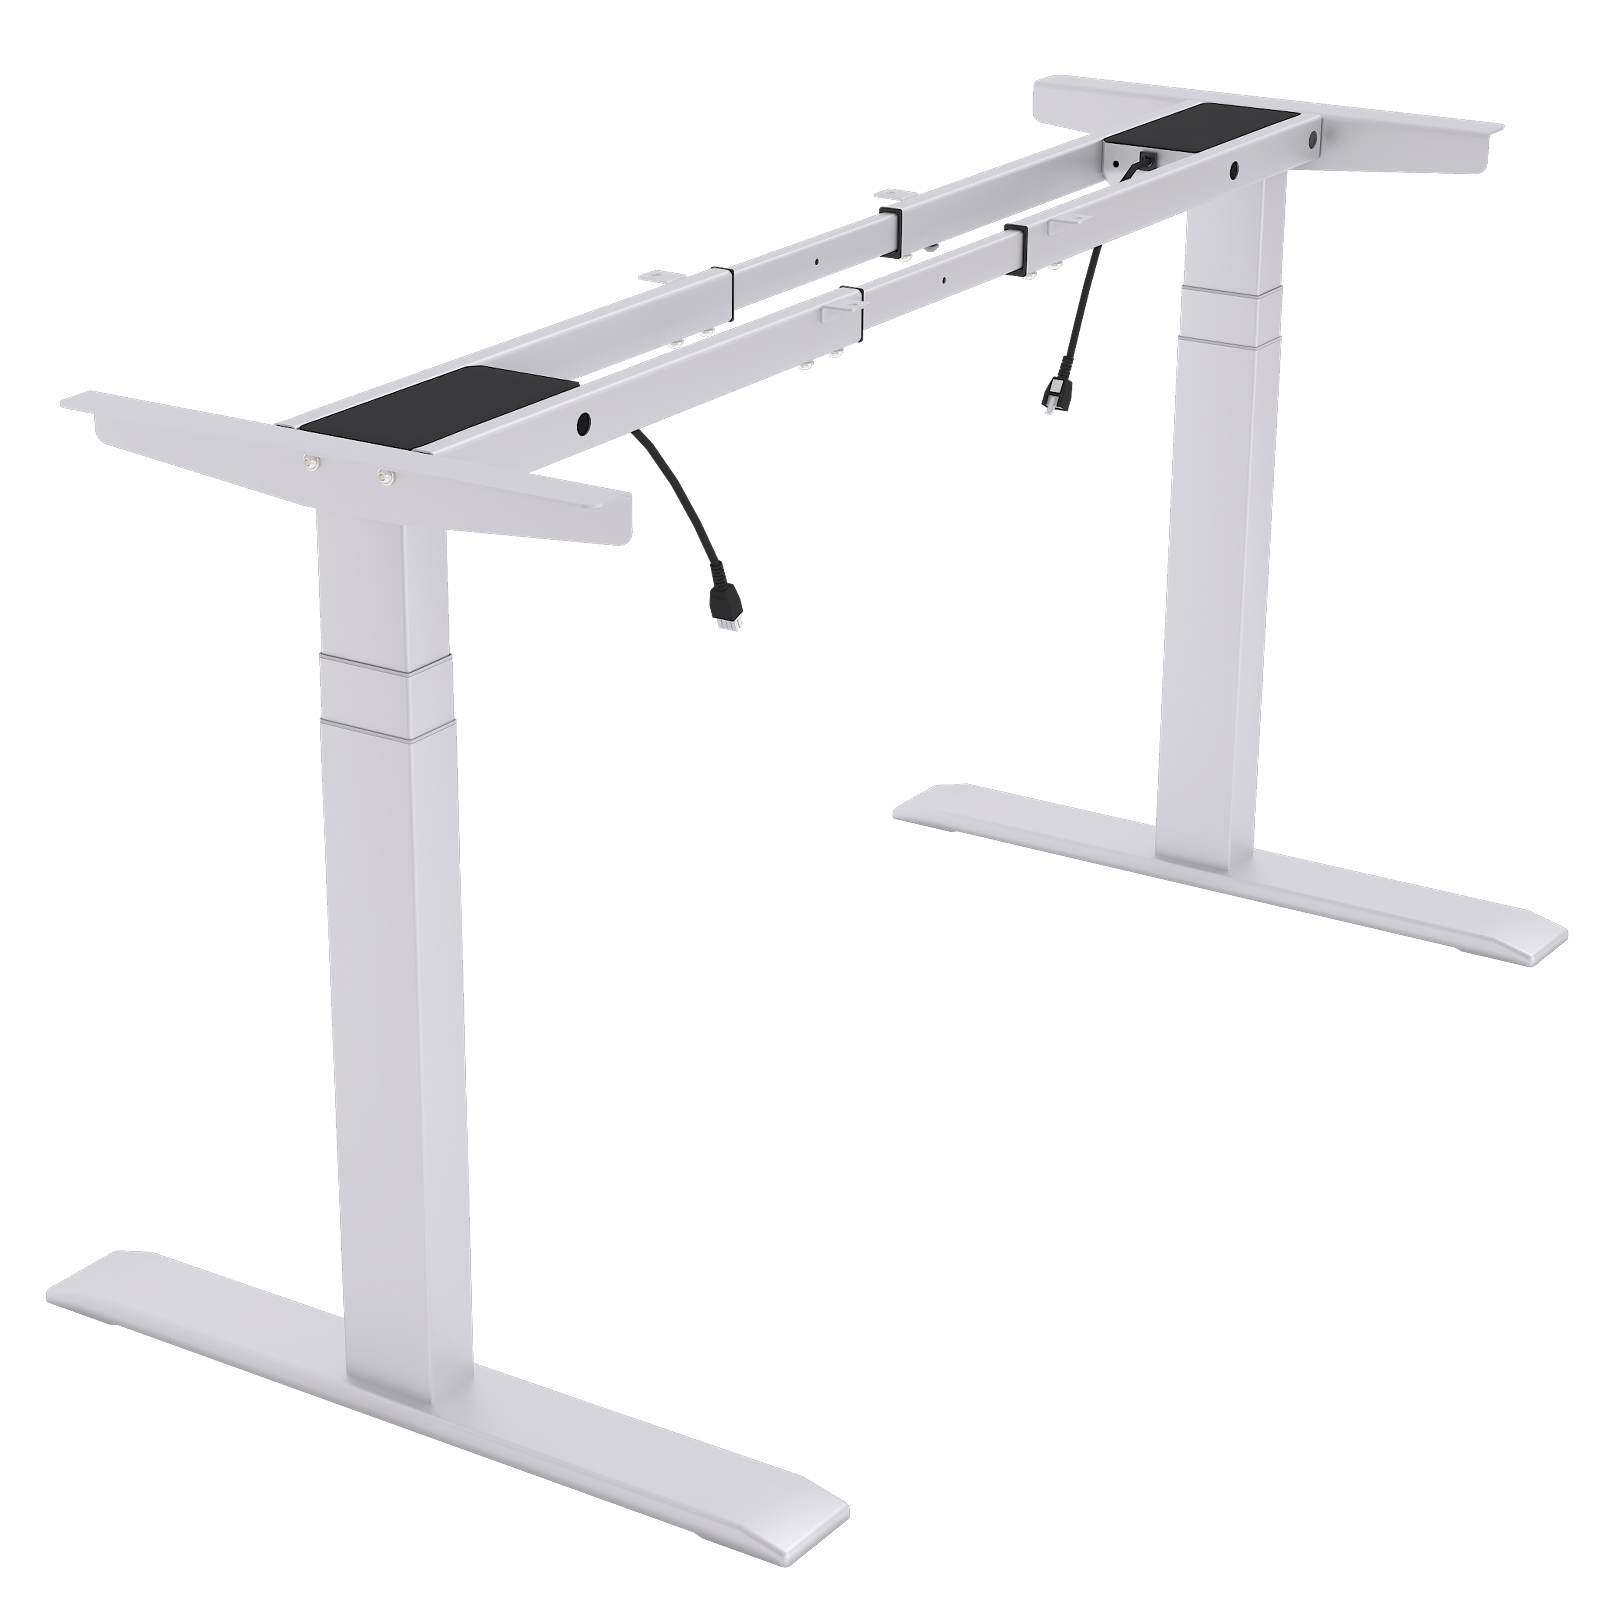 TOPSKY Dual Motor 3 Stage Electric Adjustable Standing Desk Frame Heavy Duty 300lb Load Capacity for Home Office (Frame Only) DF04.01